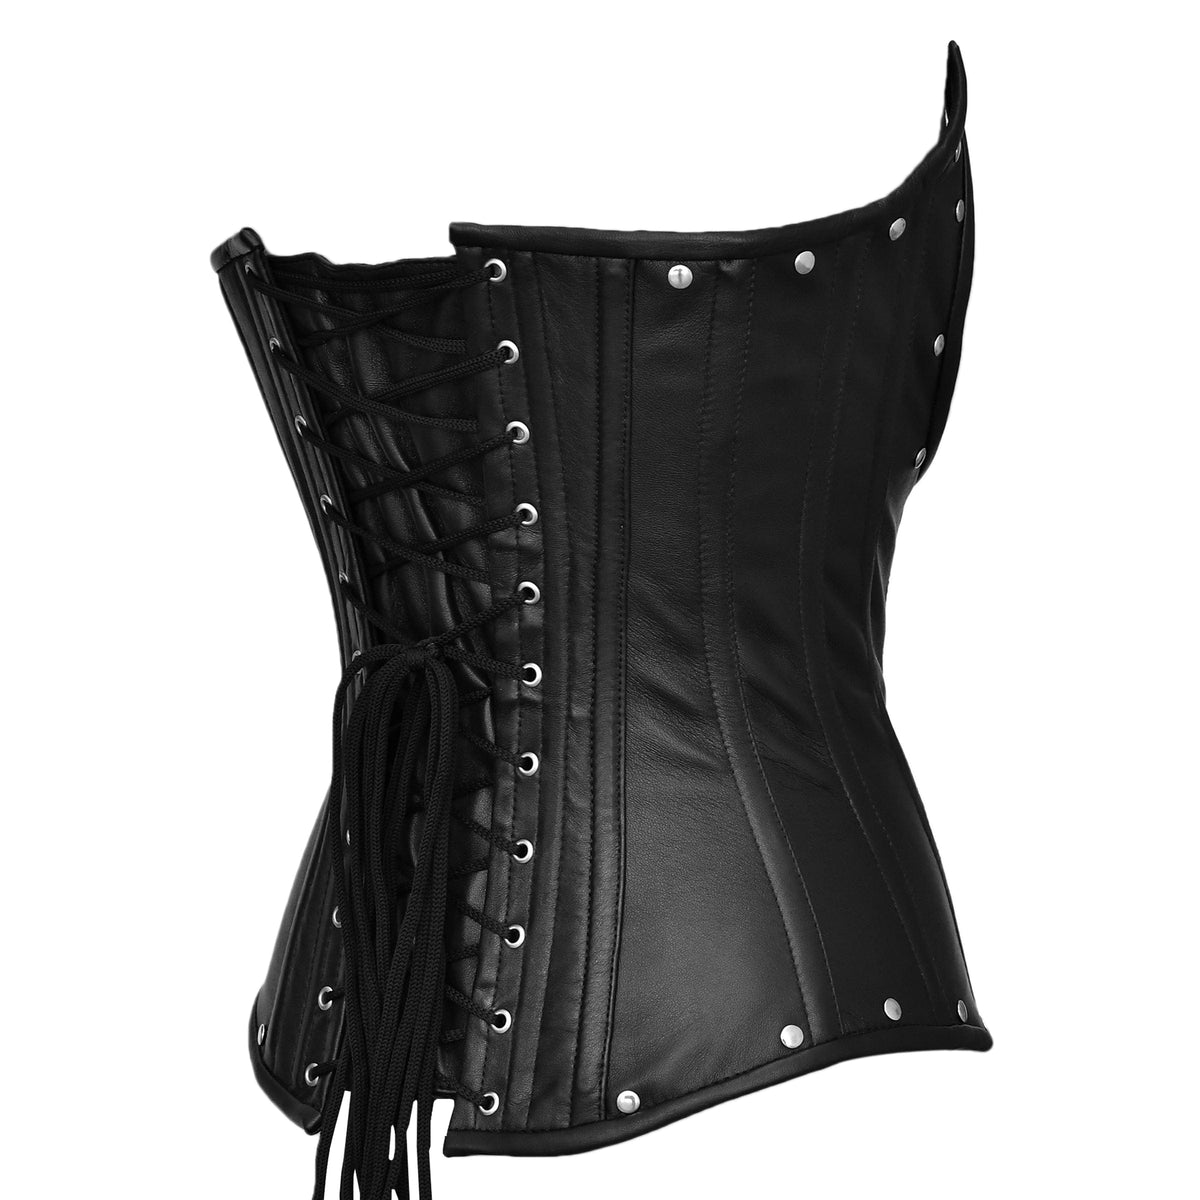 Underbust corset with shoulder straps - Lacemade Corset